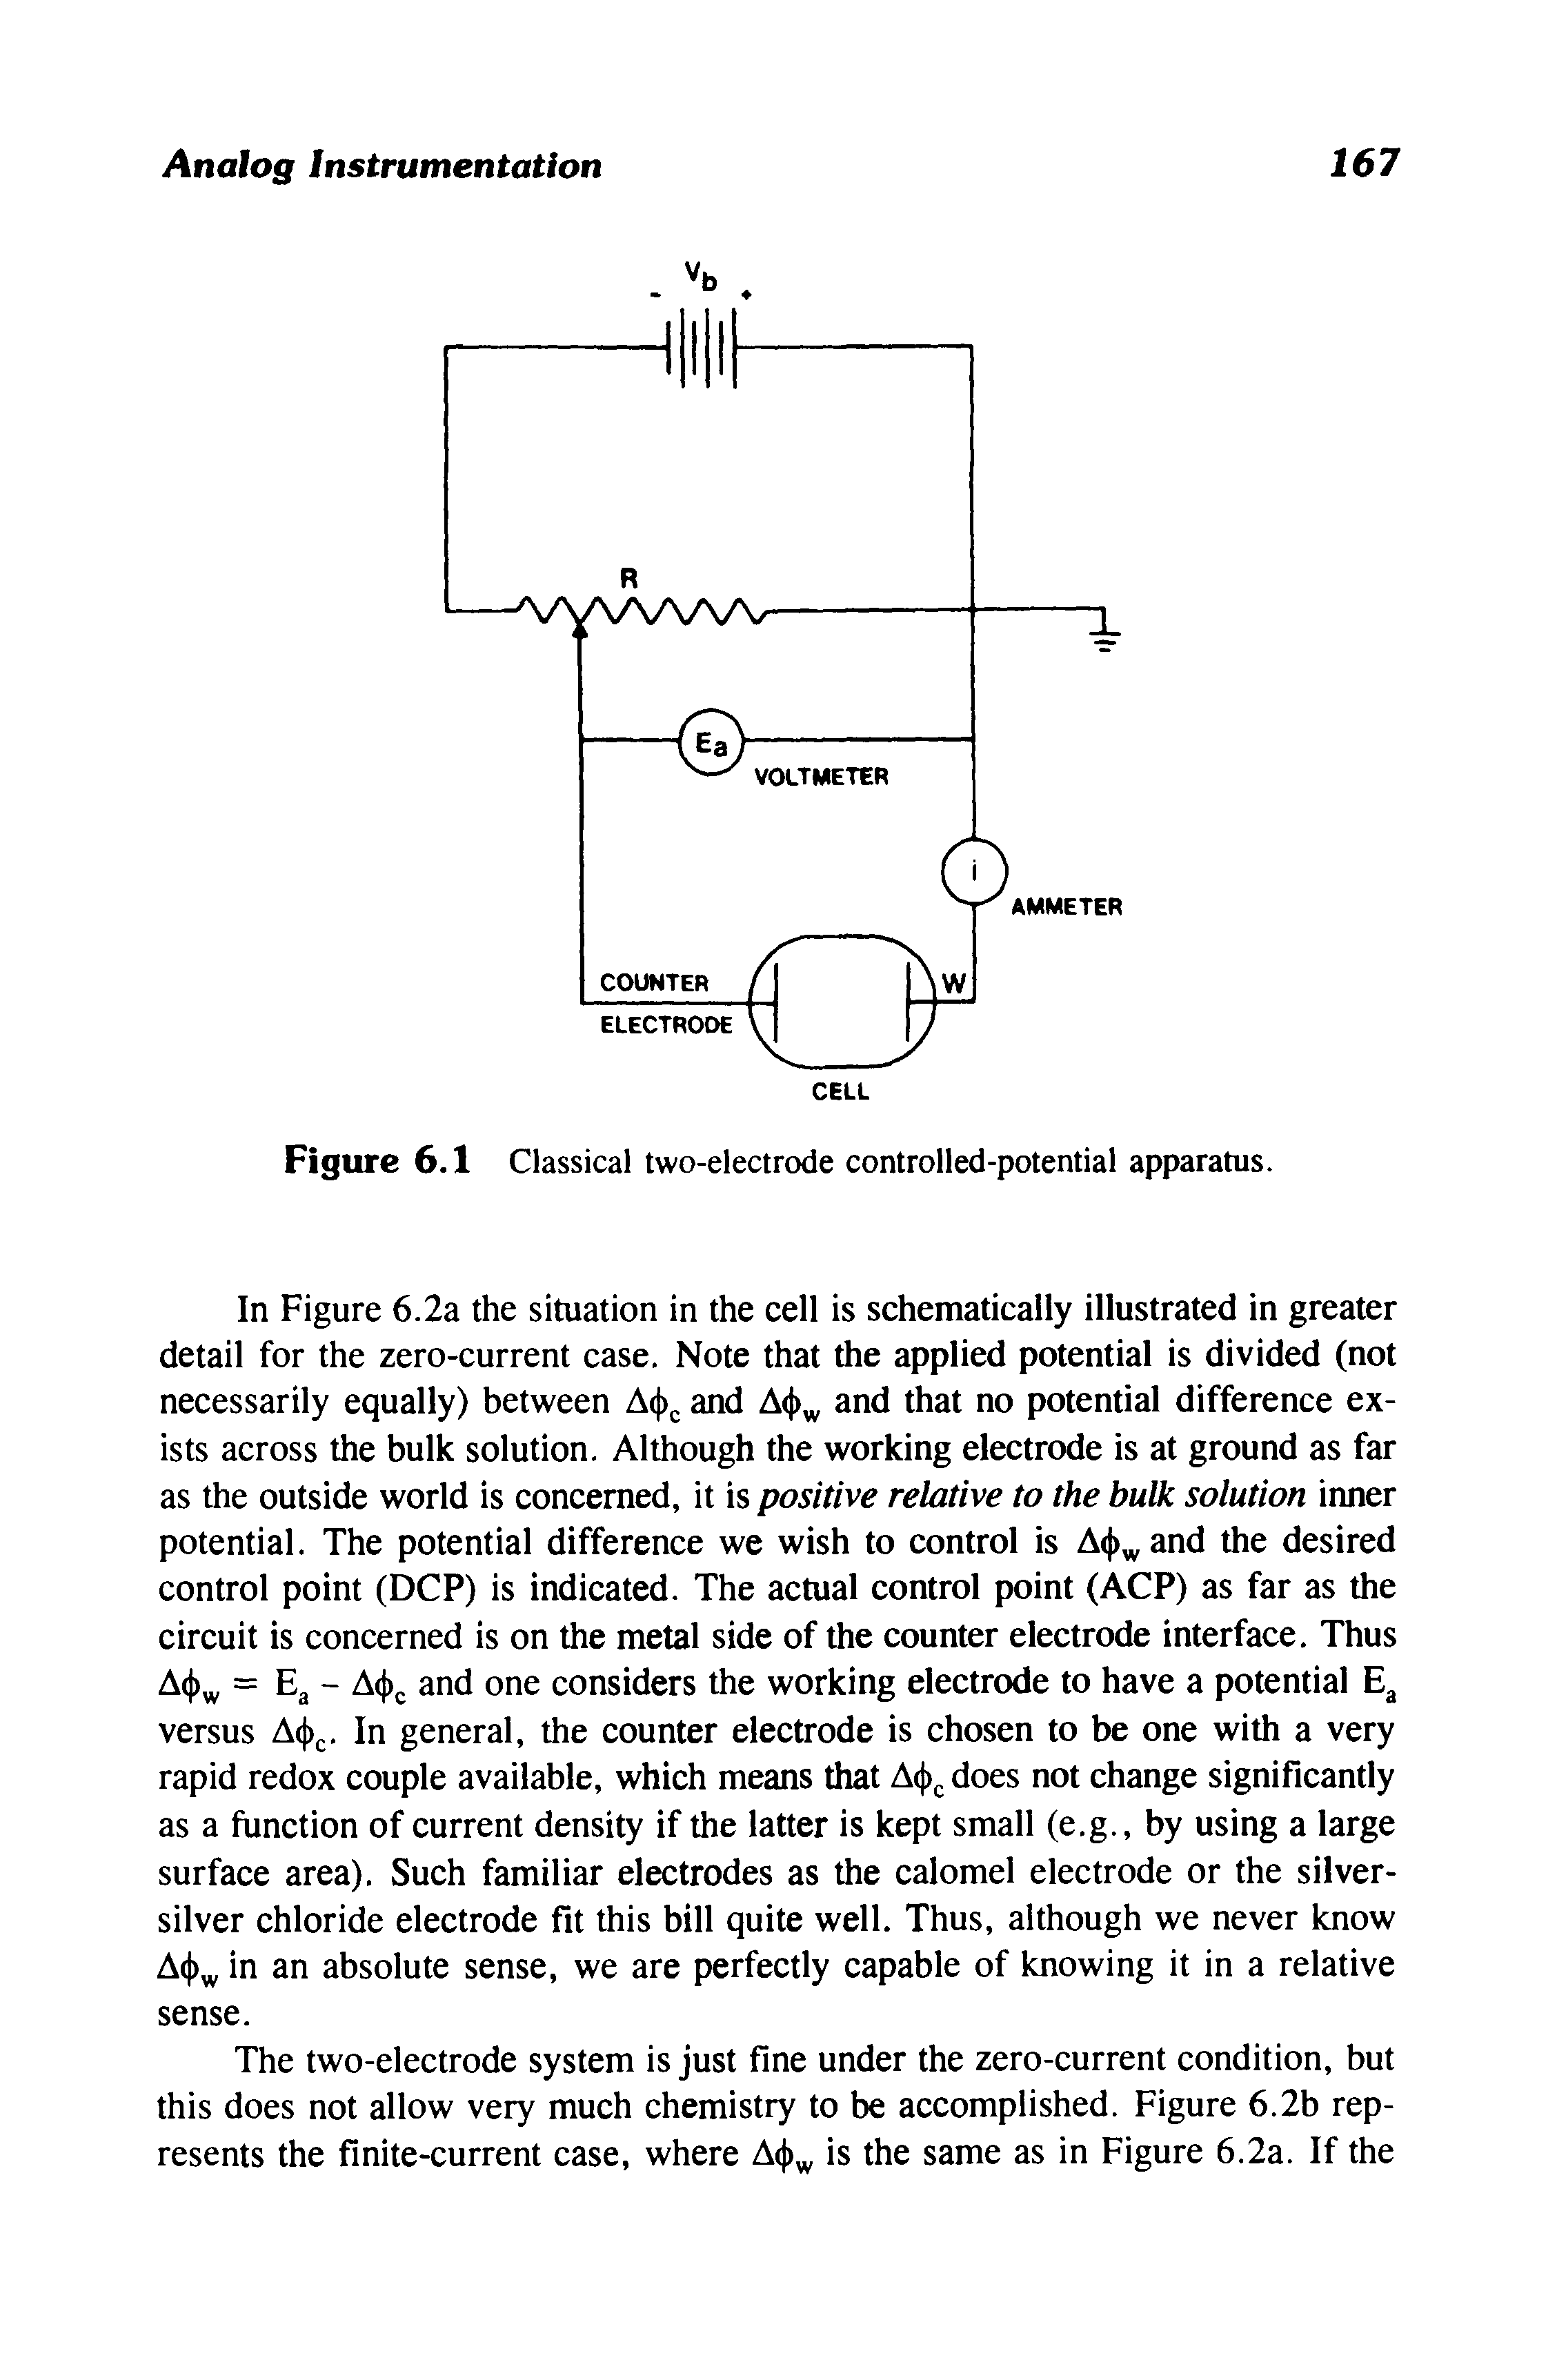 Figure 6.1 Classical two-electrode controlled-potential apparatus.